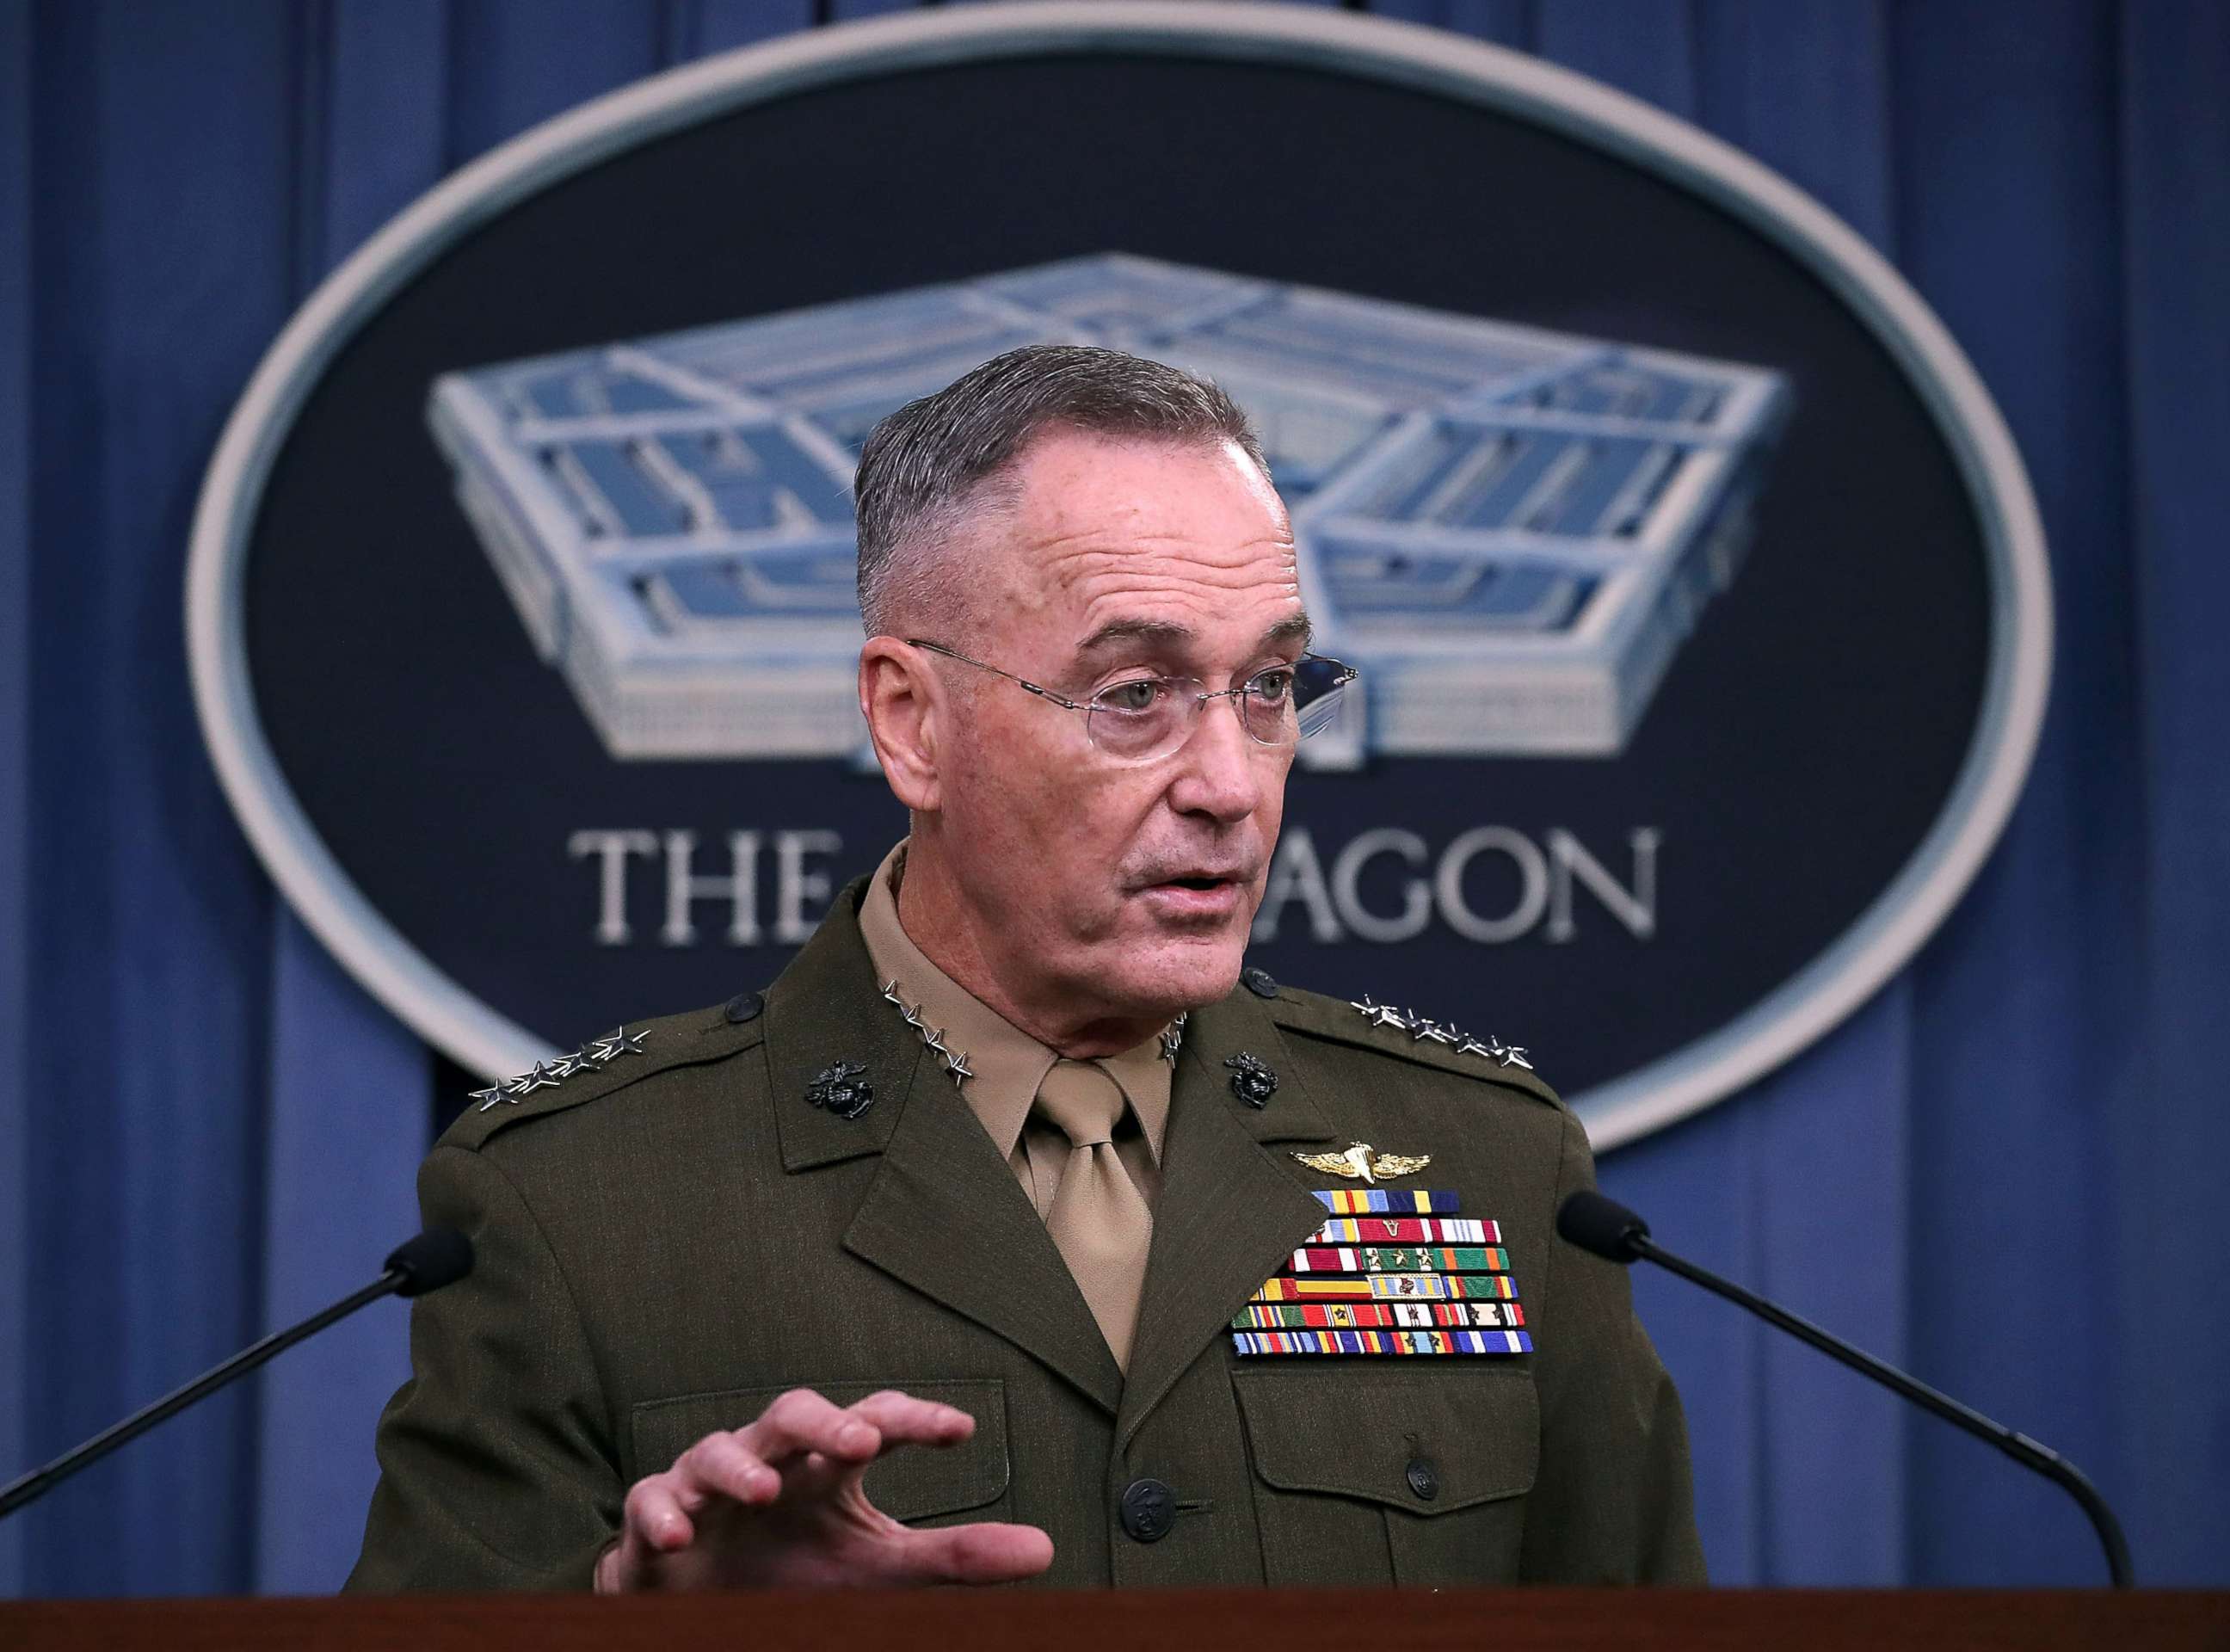 PHOTO: Gen. Joseph Dunford Jr. Chairman of the Joint Chiefs of Staff, briefs the media on the recent military operations in Niger, at the Pentagon on October 23, 2017. Four U.S. Army Special Forces members were killed on Oct. 4 in Niger by militants.